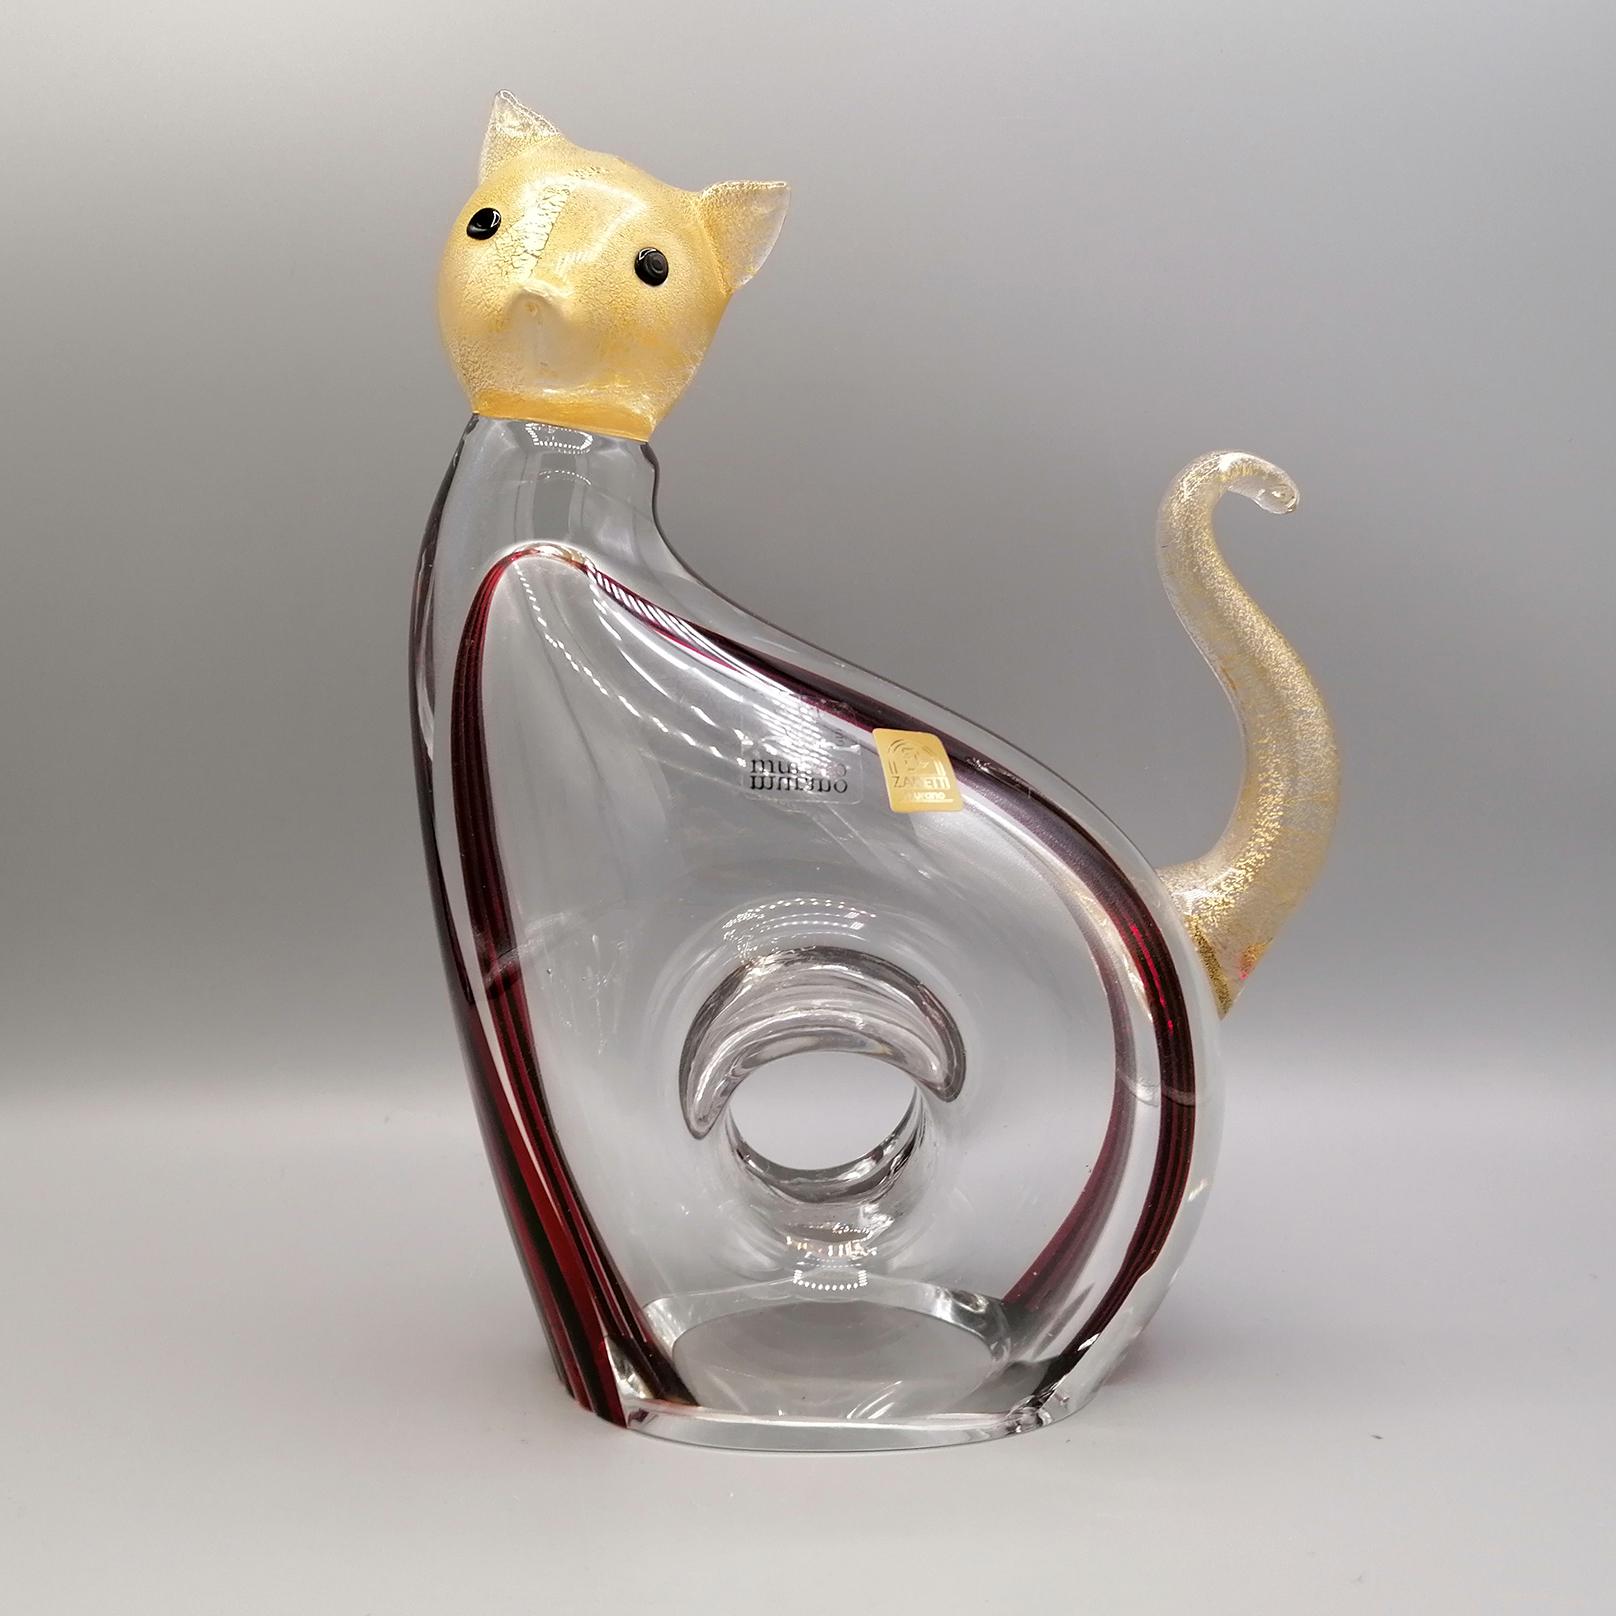 Stylized cat in Murano glass produced in Murano.
Made of transparent glass and embellished with black and amaranth white streaks that make this ornament elegant and in the same way ... trendy
Entirely made of mouth-blown glass, the cat’s body is